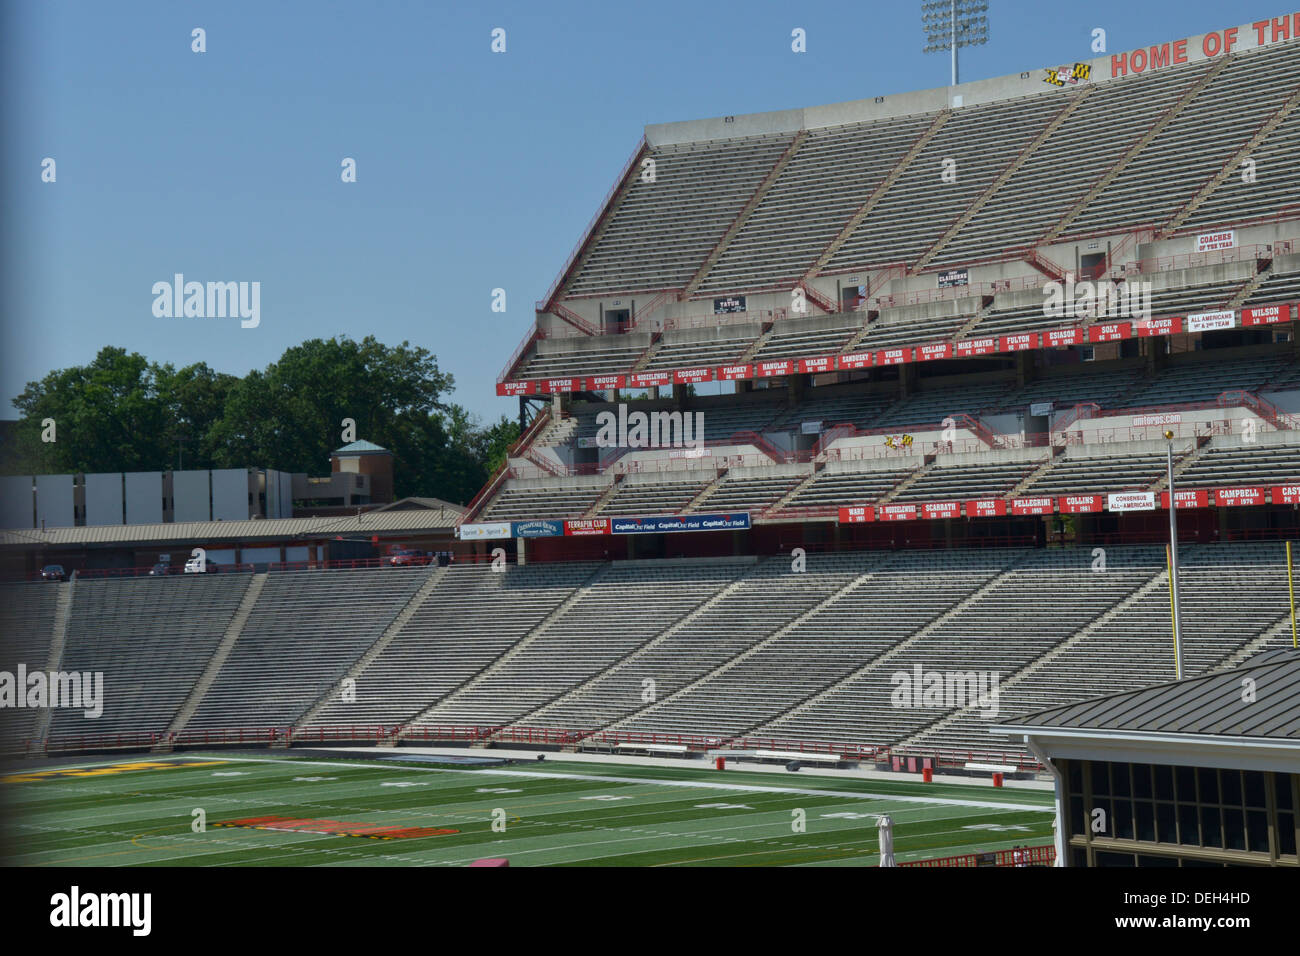 Capital One Field at the University of Maryland Stock Photo